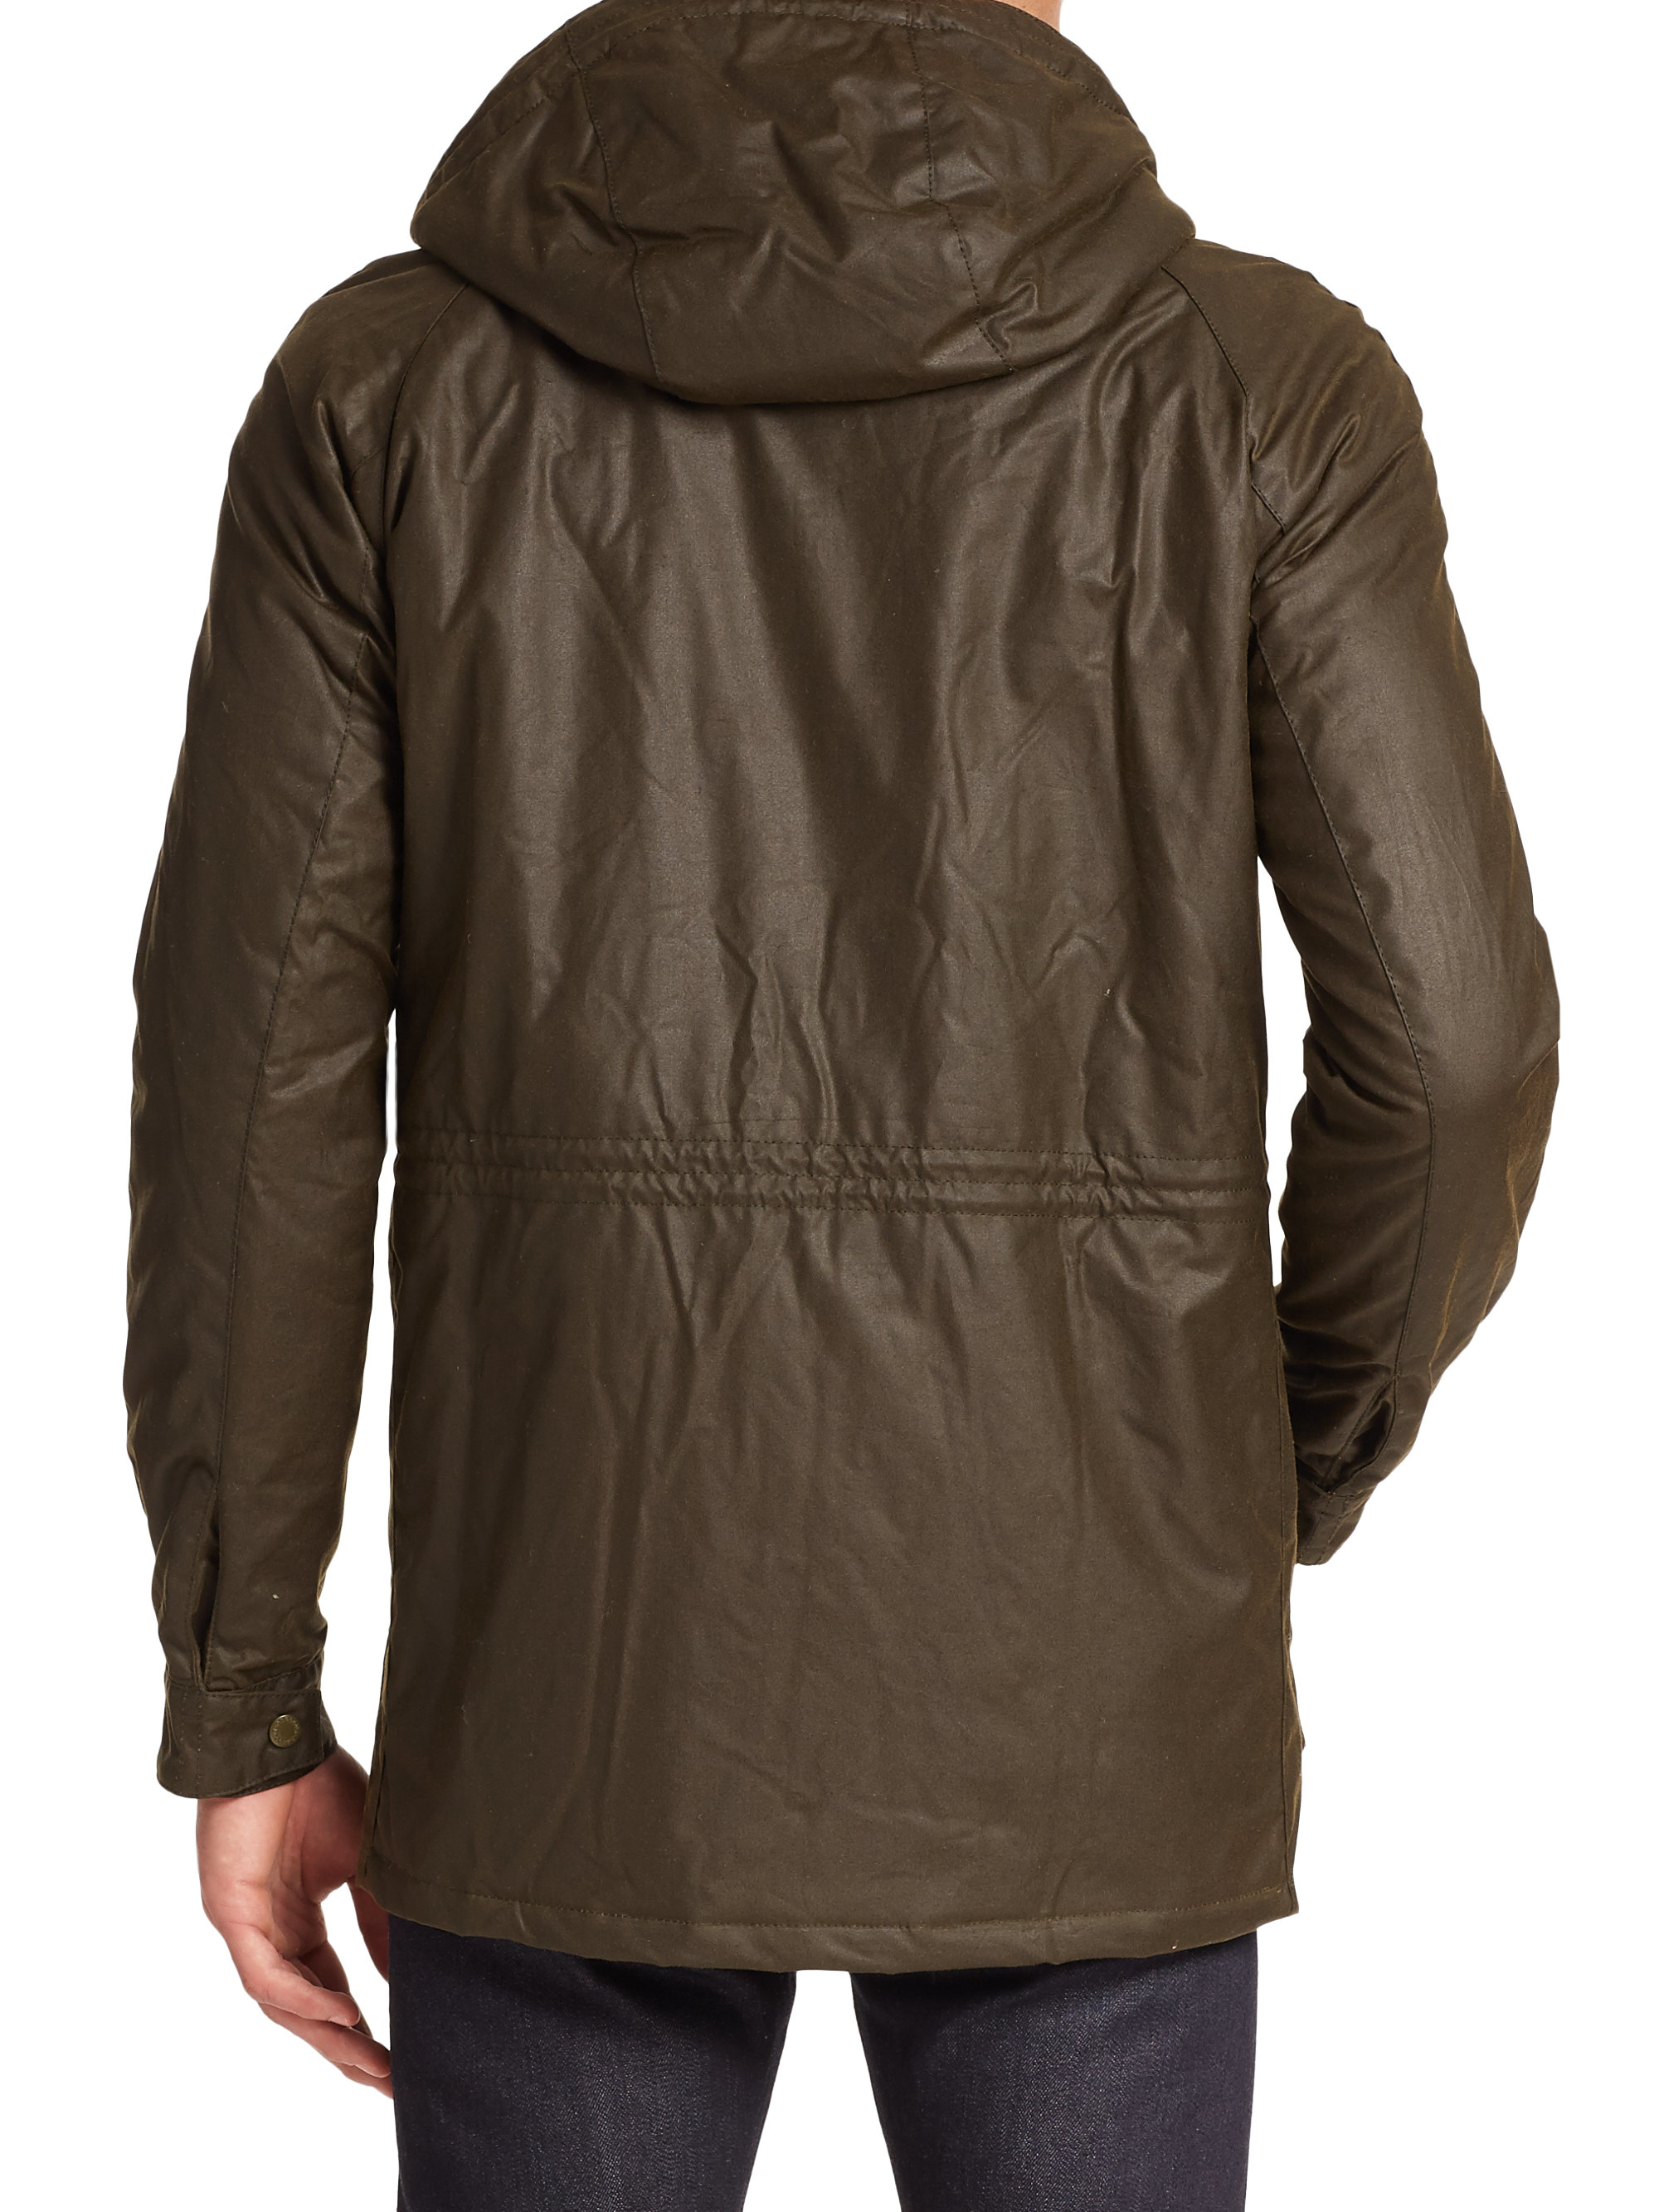 barbour brindle jacket Cheaper Than Retail Price> Buy Clothing, Accessories  and lifestyle products for women & men -